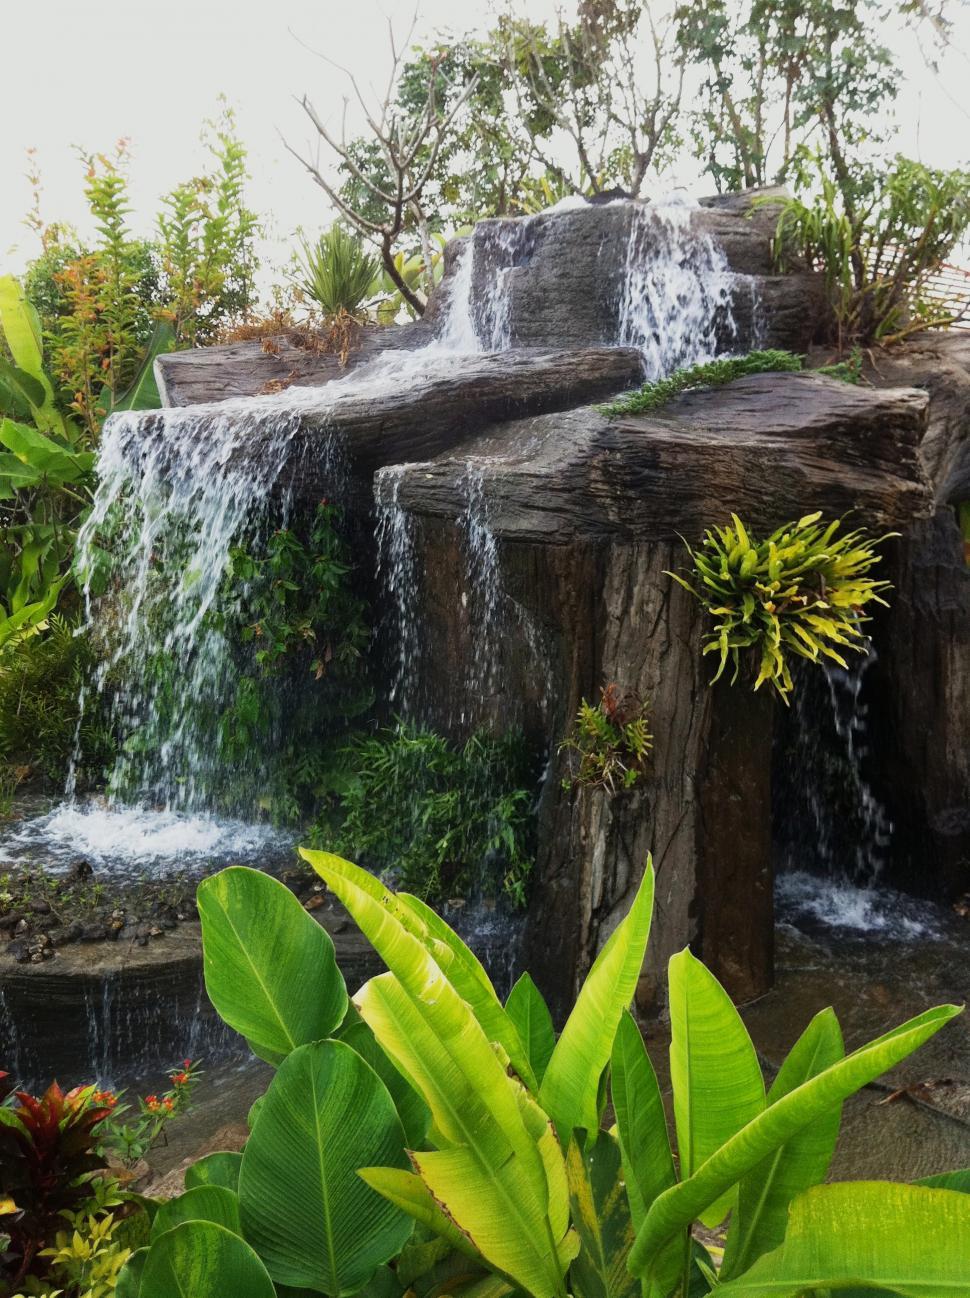 Free Image of Tropical Garden Waterfall Feature 